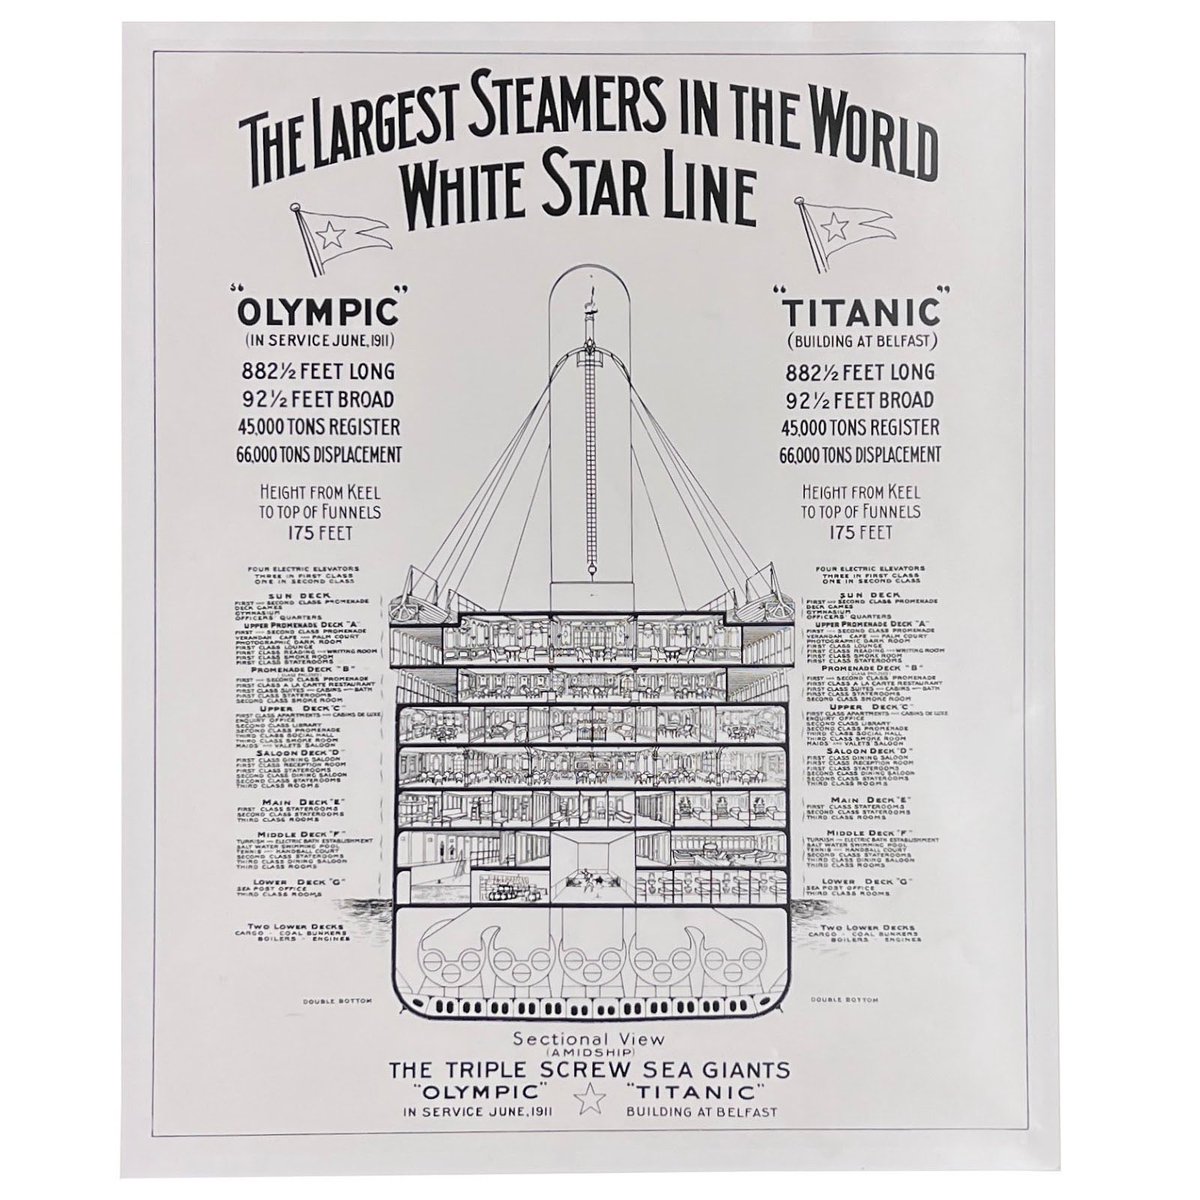 #OTD in 1912, just before midnight, RMS #Titanic struck an iceberg on her maiden voyage across the North Atlantic. Compromises in her design led to the collision being fatal for thousands of passengers and crew, impacting every level of NYC society highlighting class inequities.